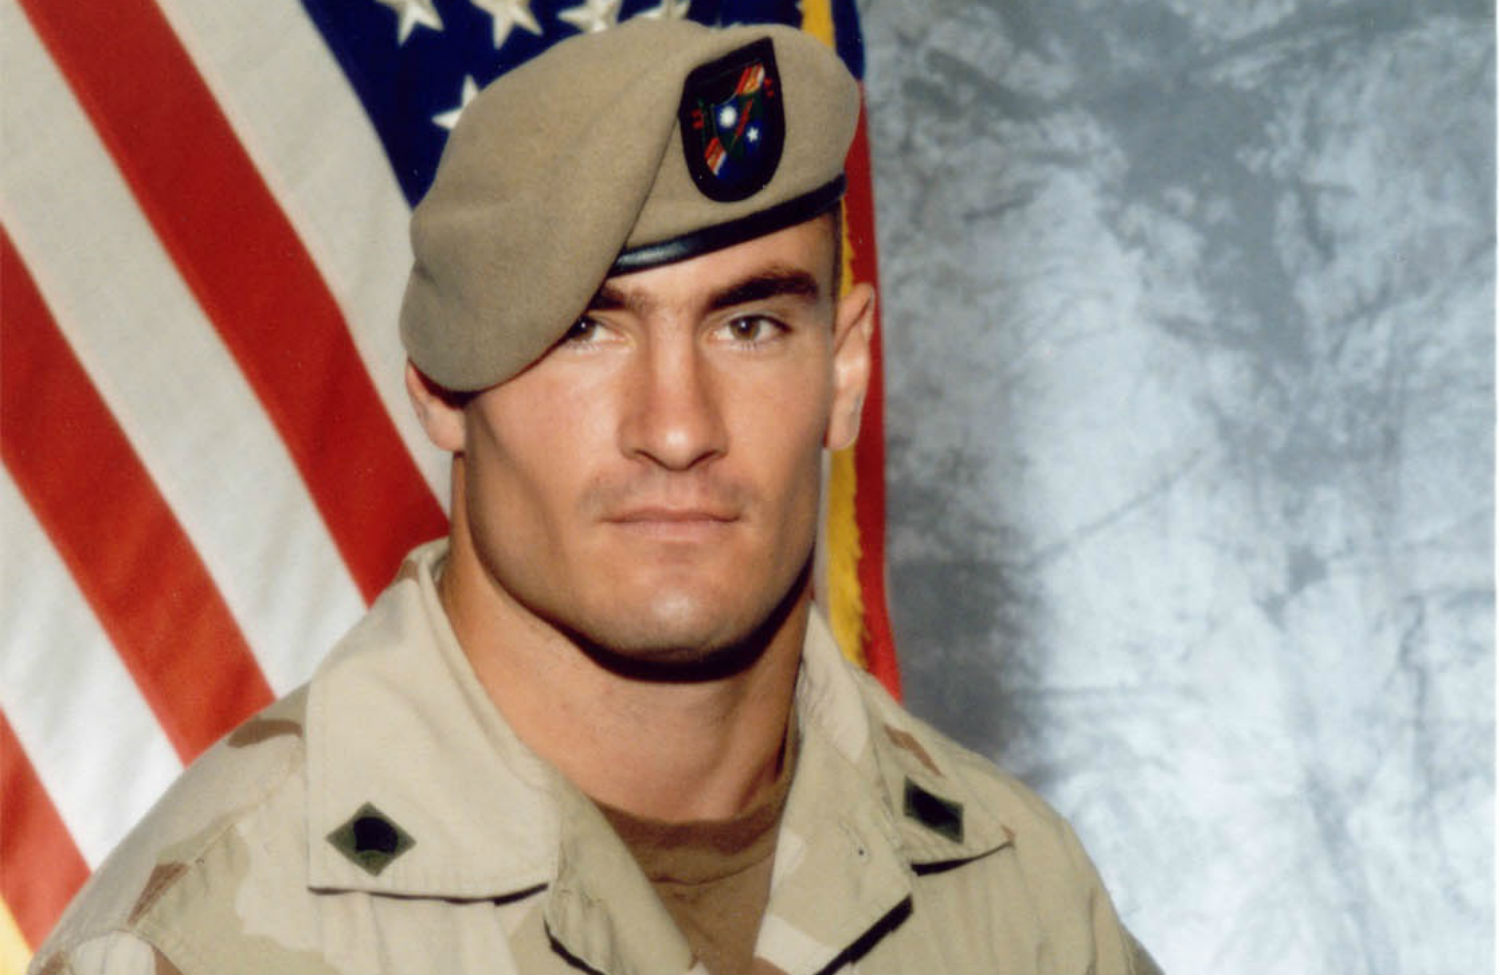 Concerns About the 'Pat Tillman' Military-Themed Sports Uniforms